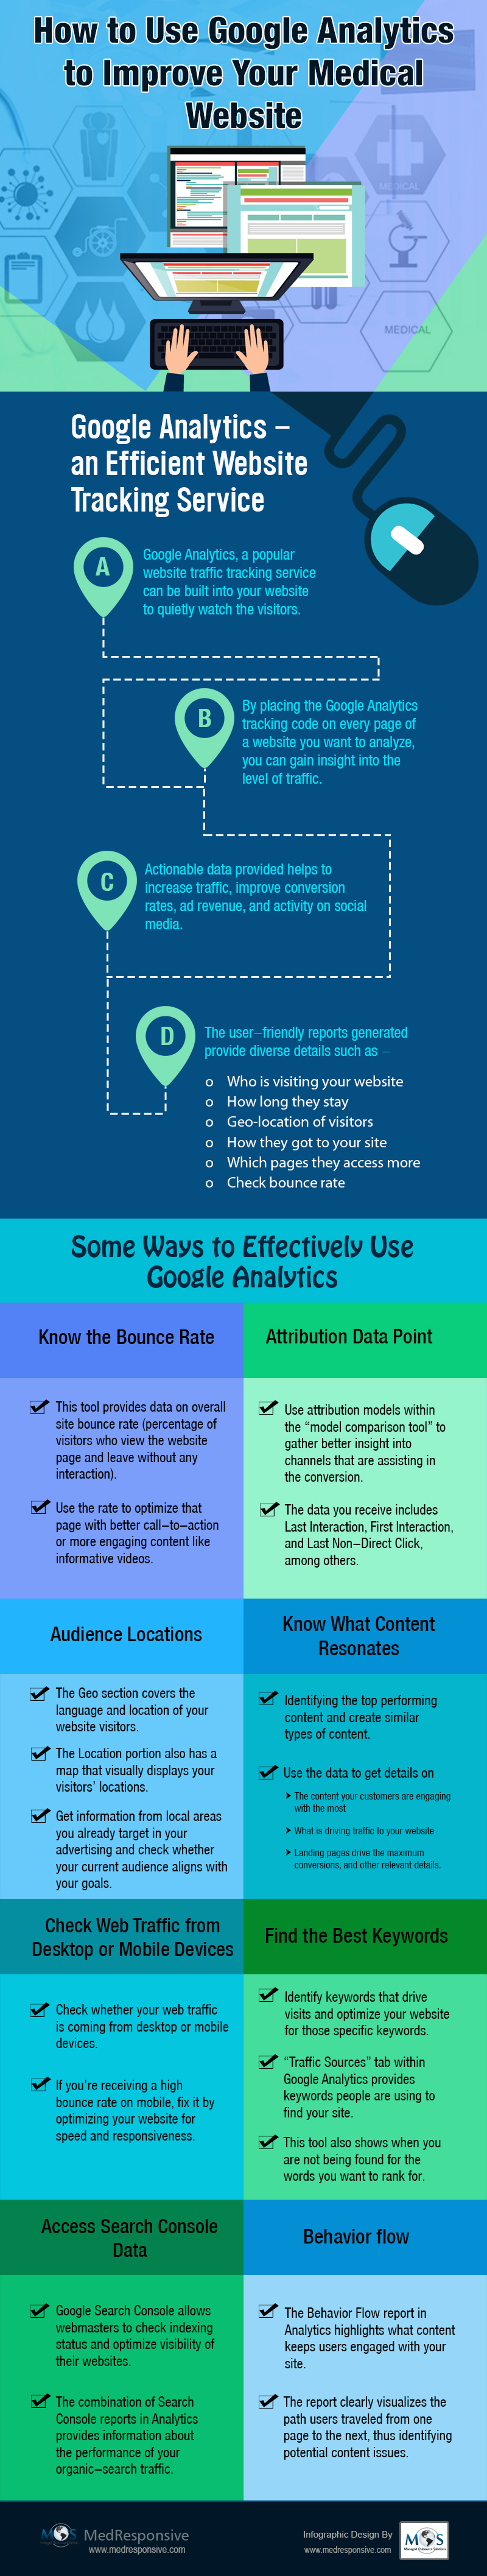 How to Use Google Analytics to Improve Your Medical Website